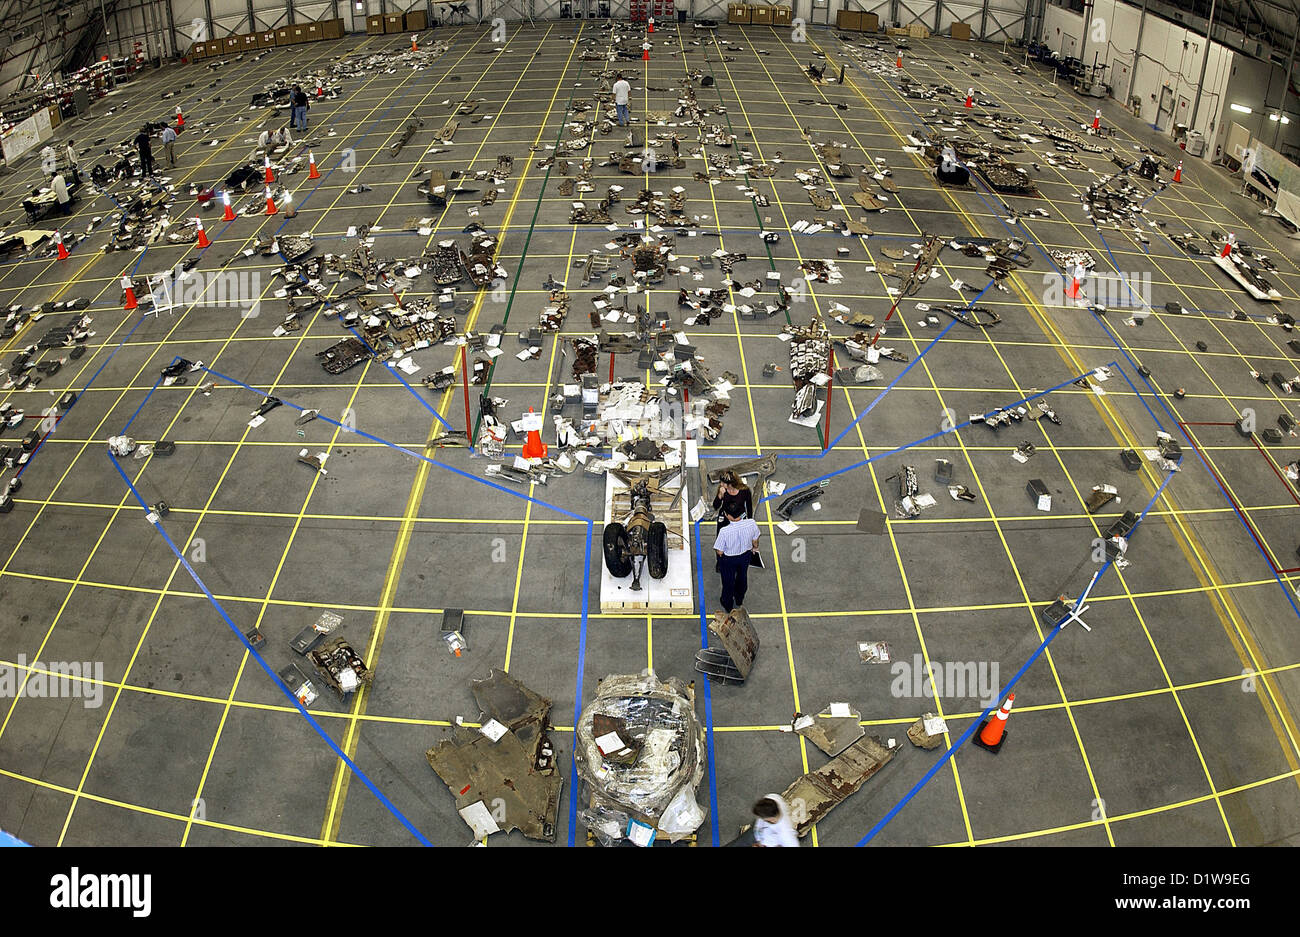 Space Shuttle Columbia disaster, grid on the floor of the RLV Hangar as workers bring in pieces of Columbia's debris Stock Photo